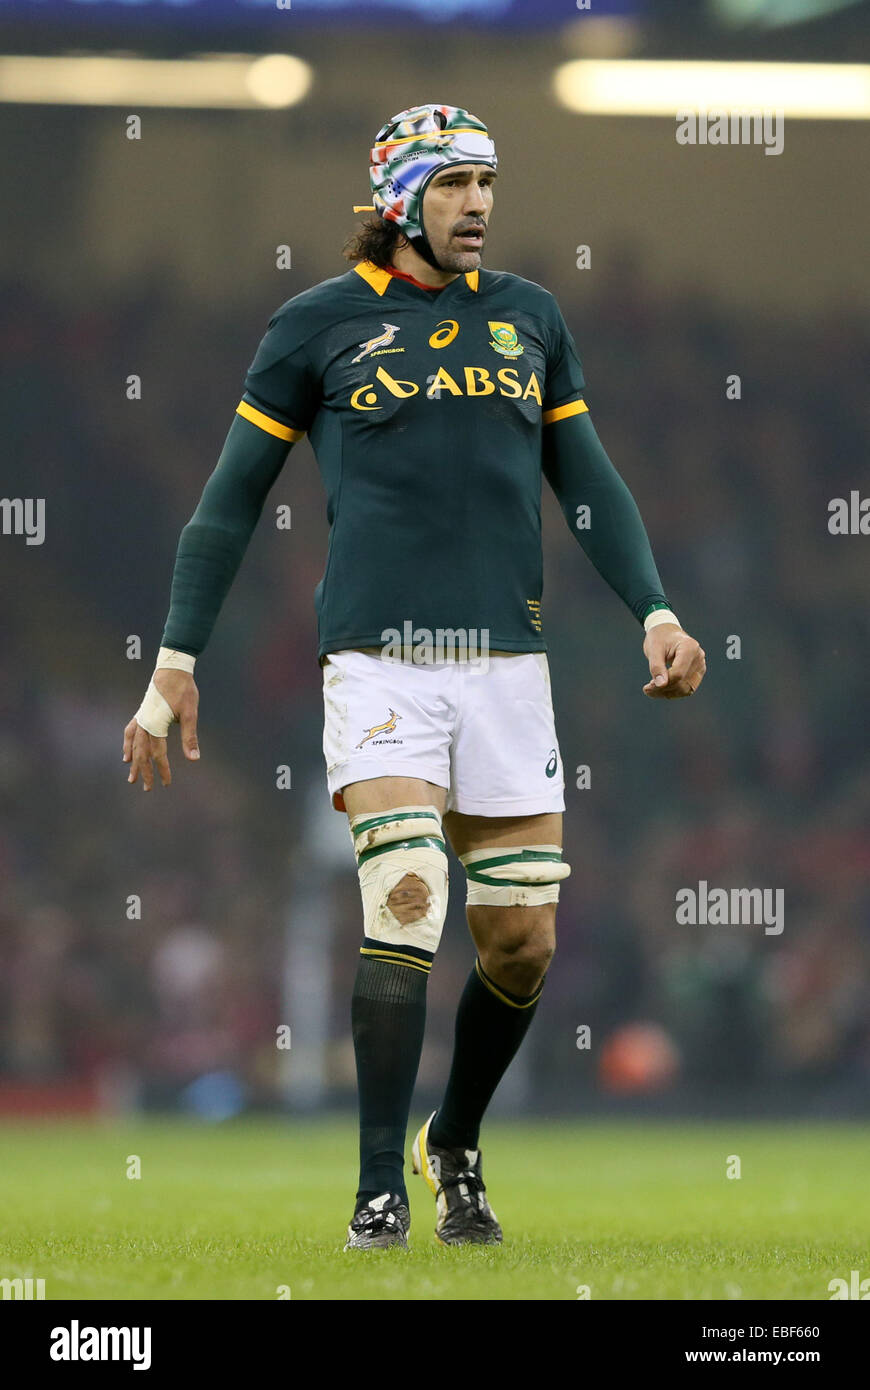 Cardiff, UK. 29th Nov, 2014. Victor Matfield of South Africa - Autumn Internationals - Wales vs South Africa - Millennium Stadium - Cardiff - Wales - 29th November 2014 - Picture Simon Bellis/Sportimage. Credit:  csm/Alamy Live News Stock Photo